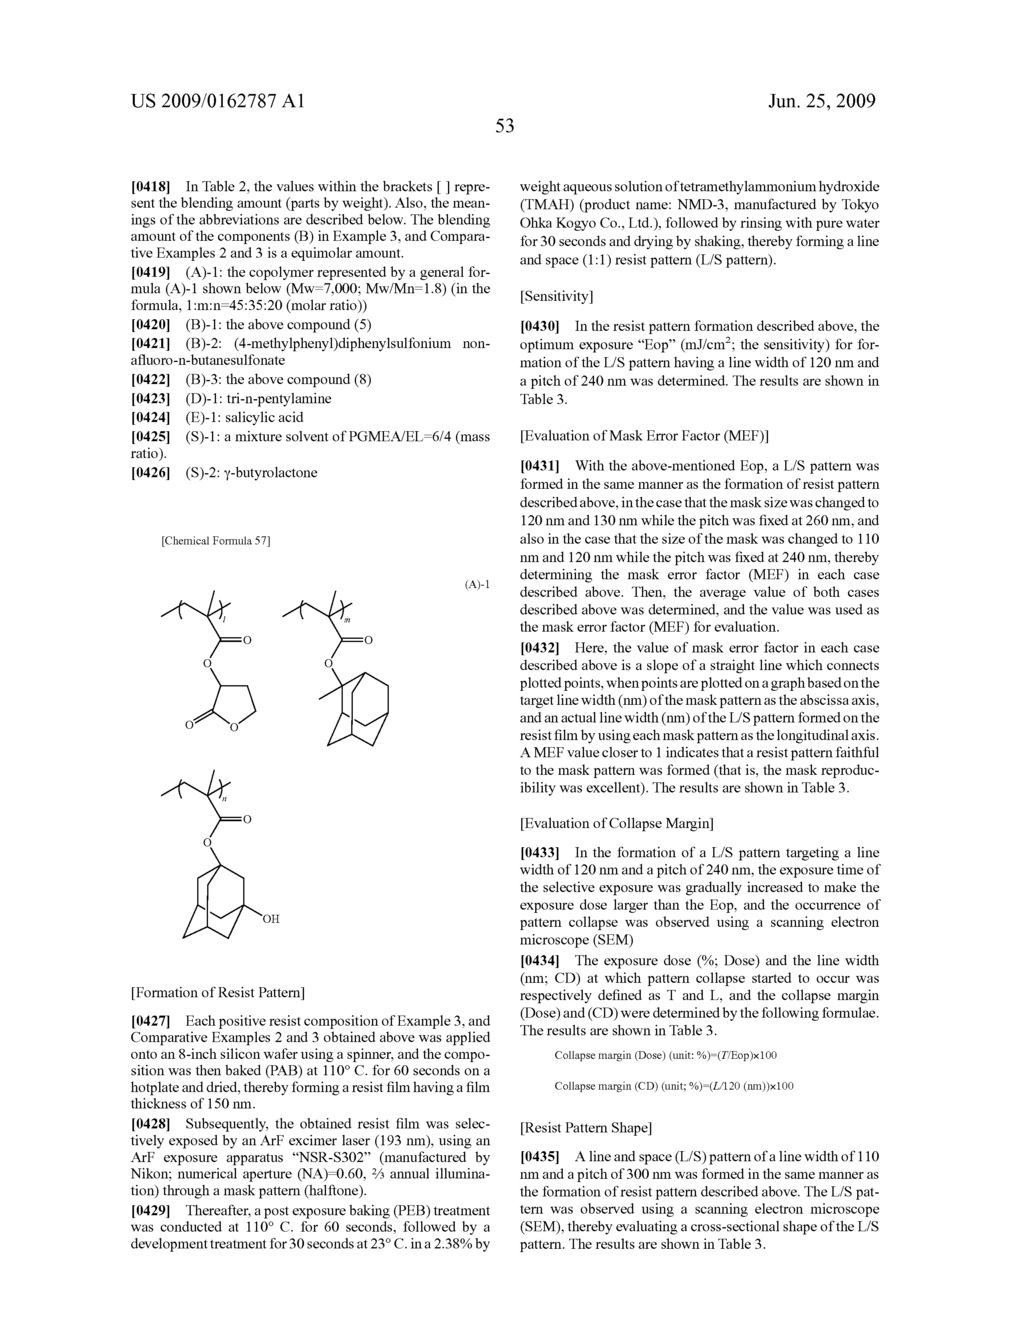 NOVEL COMPOUND, ACID GENERATOR, RESIST COMPOSITION AND METHOD OF FORMING RESIST PATTERN - diagram, schematic, and image 54